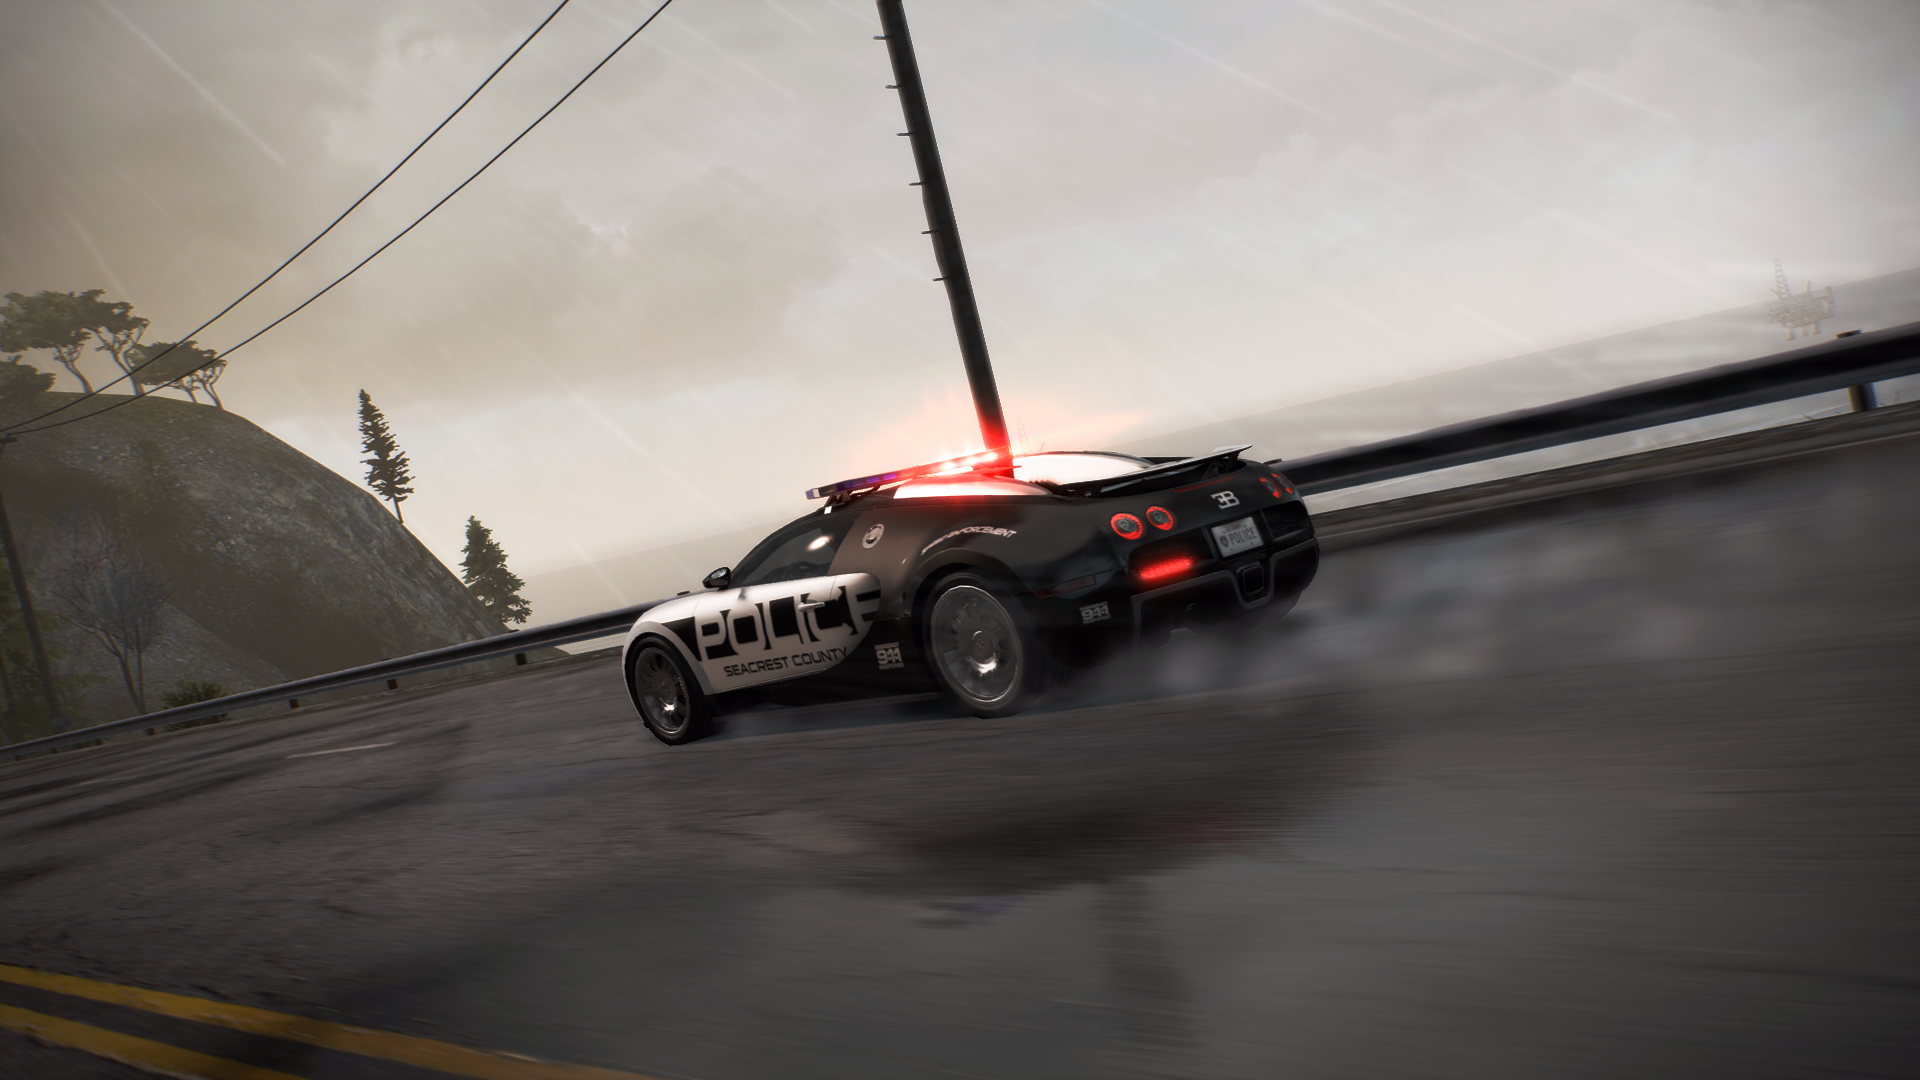 General 1920x1080 Need for Speed: Hot Pursuit Bugatti Veyron Bugatti car vehicle police cars video games